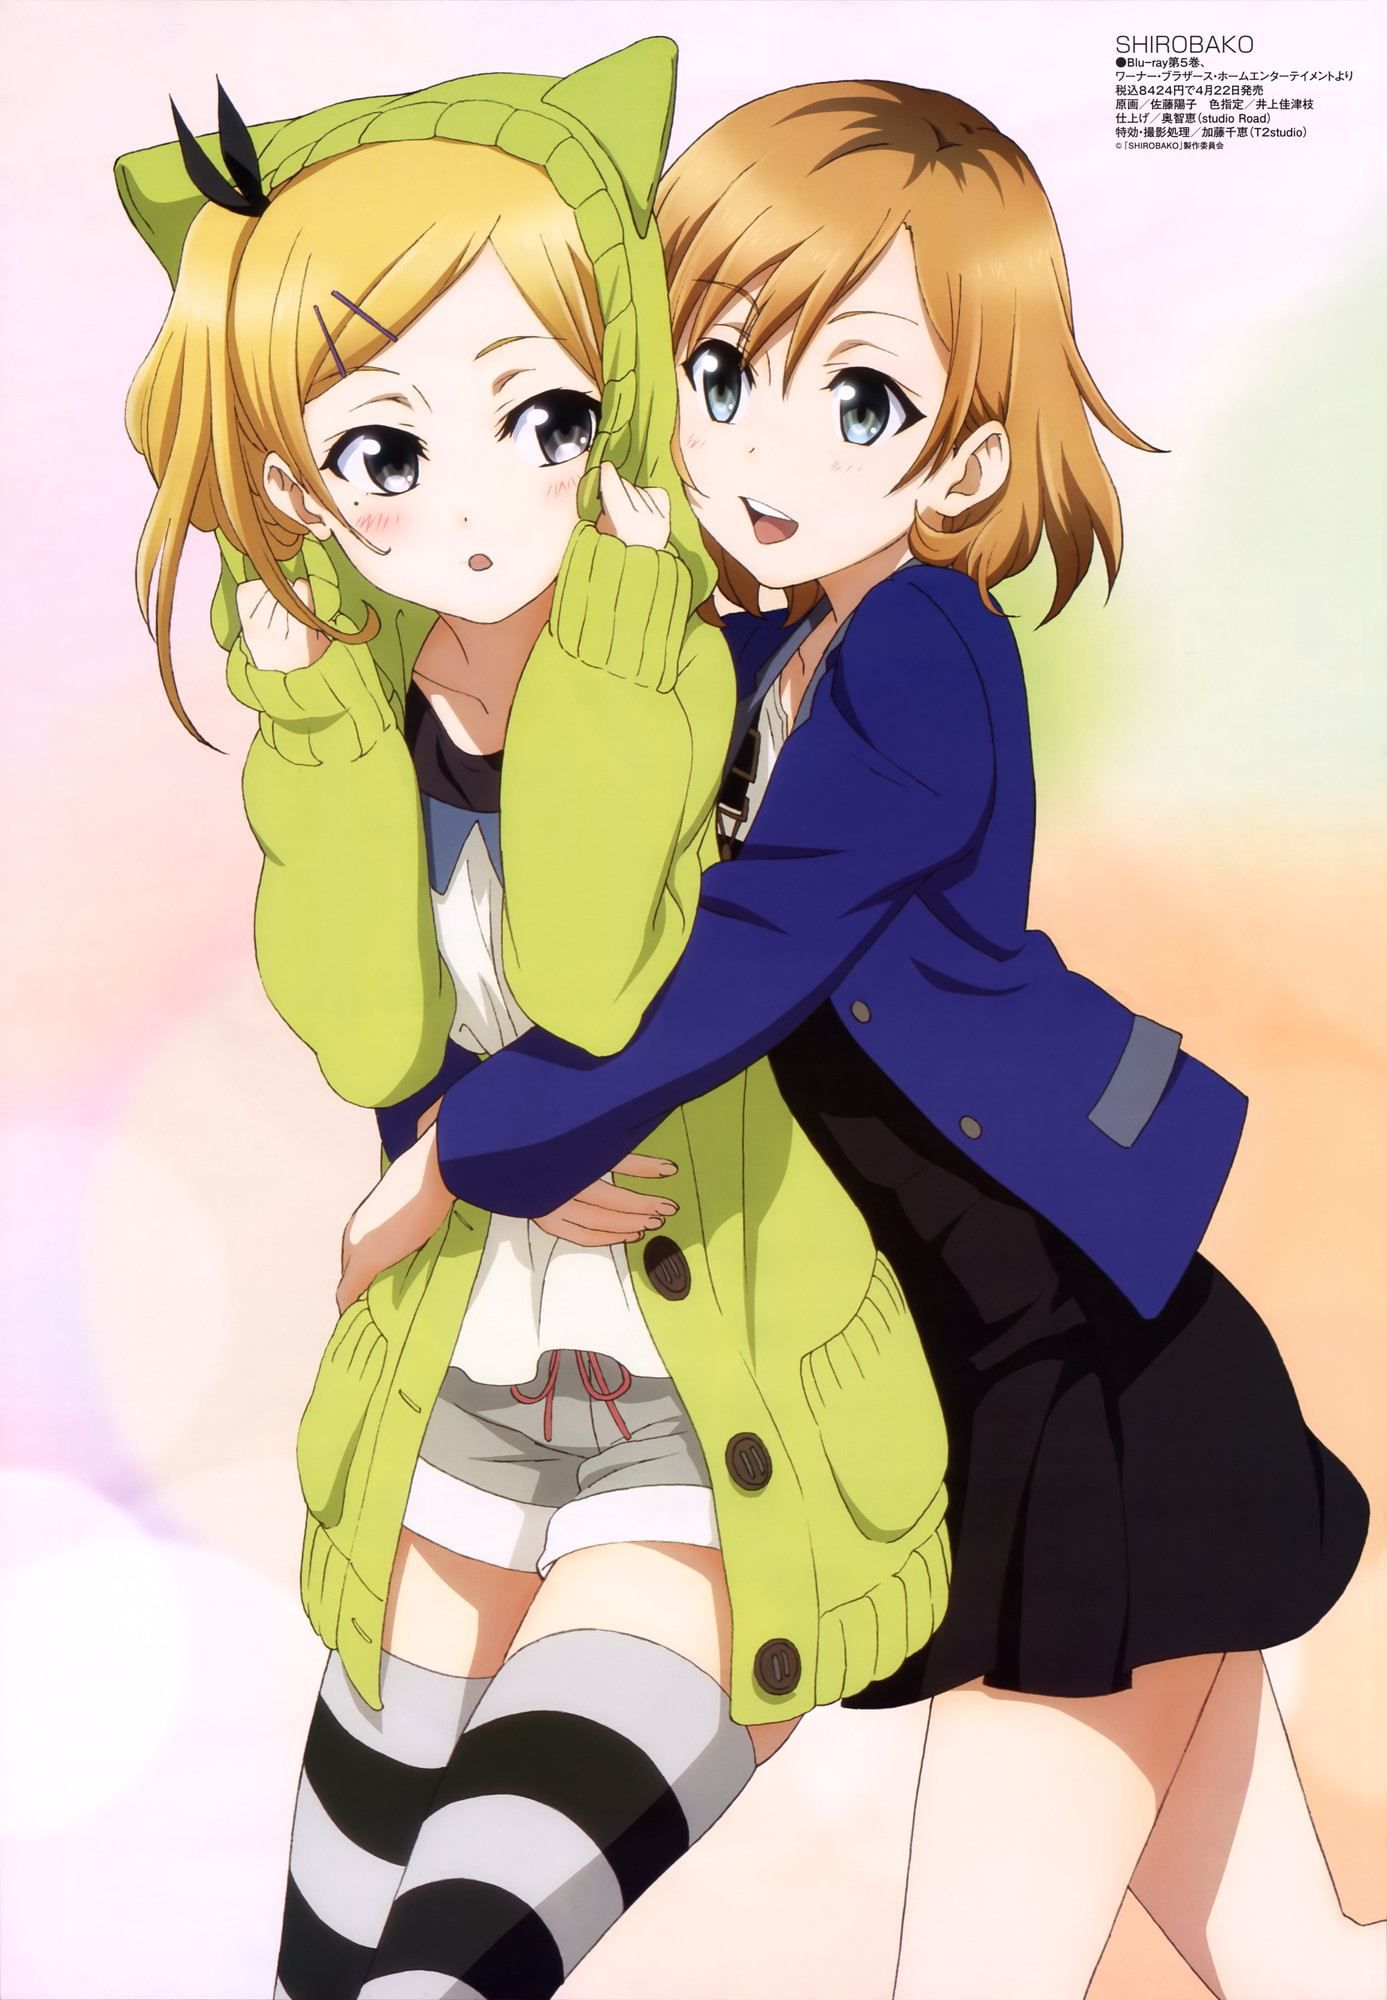 [SHIROBAKO] I will post erotic cute images of Erika Yano together for free ☆ 5